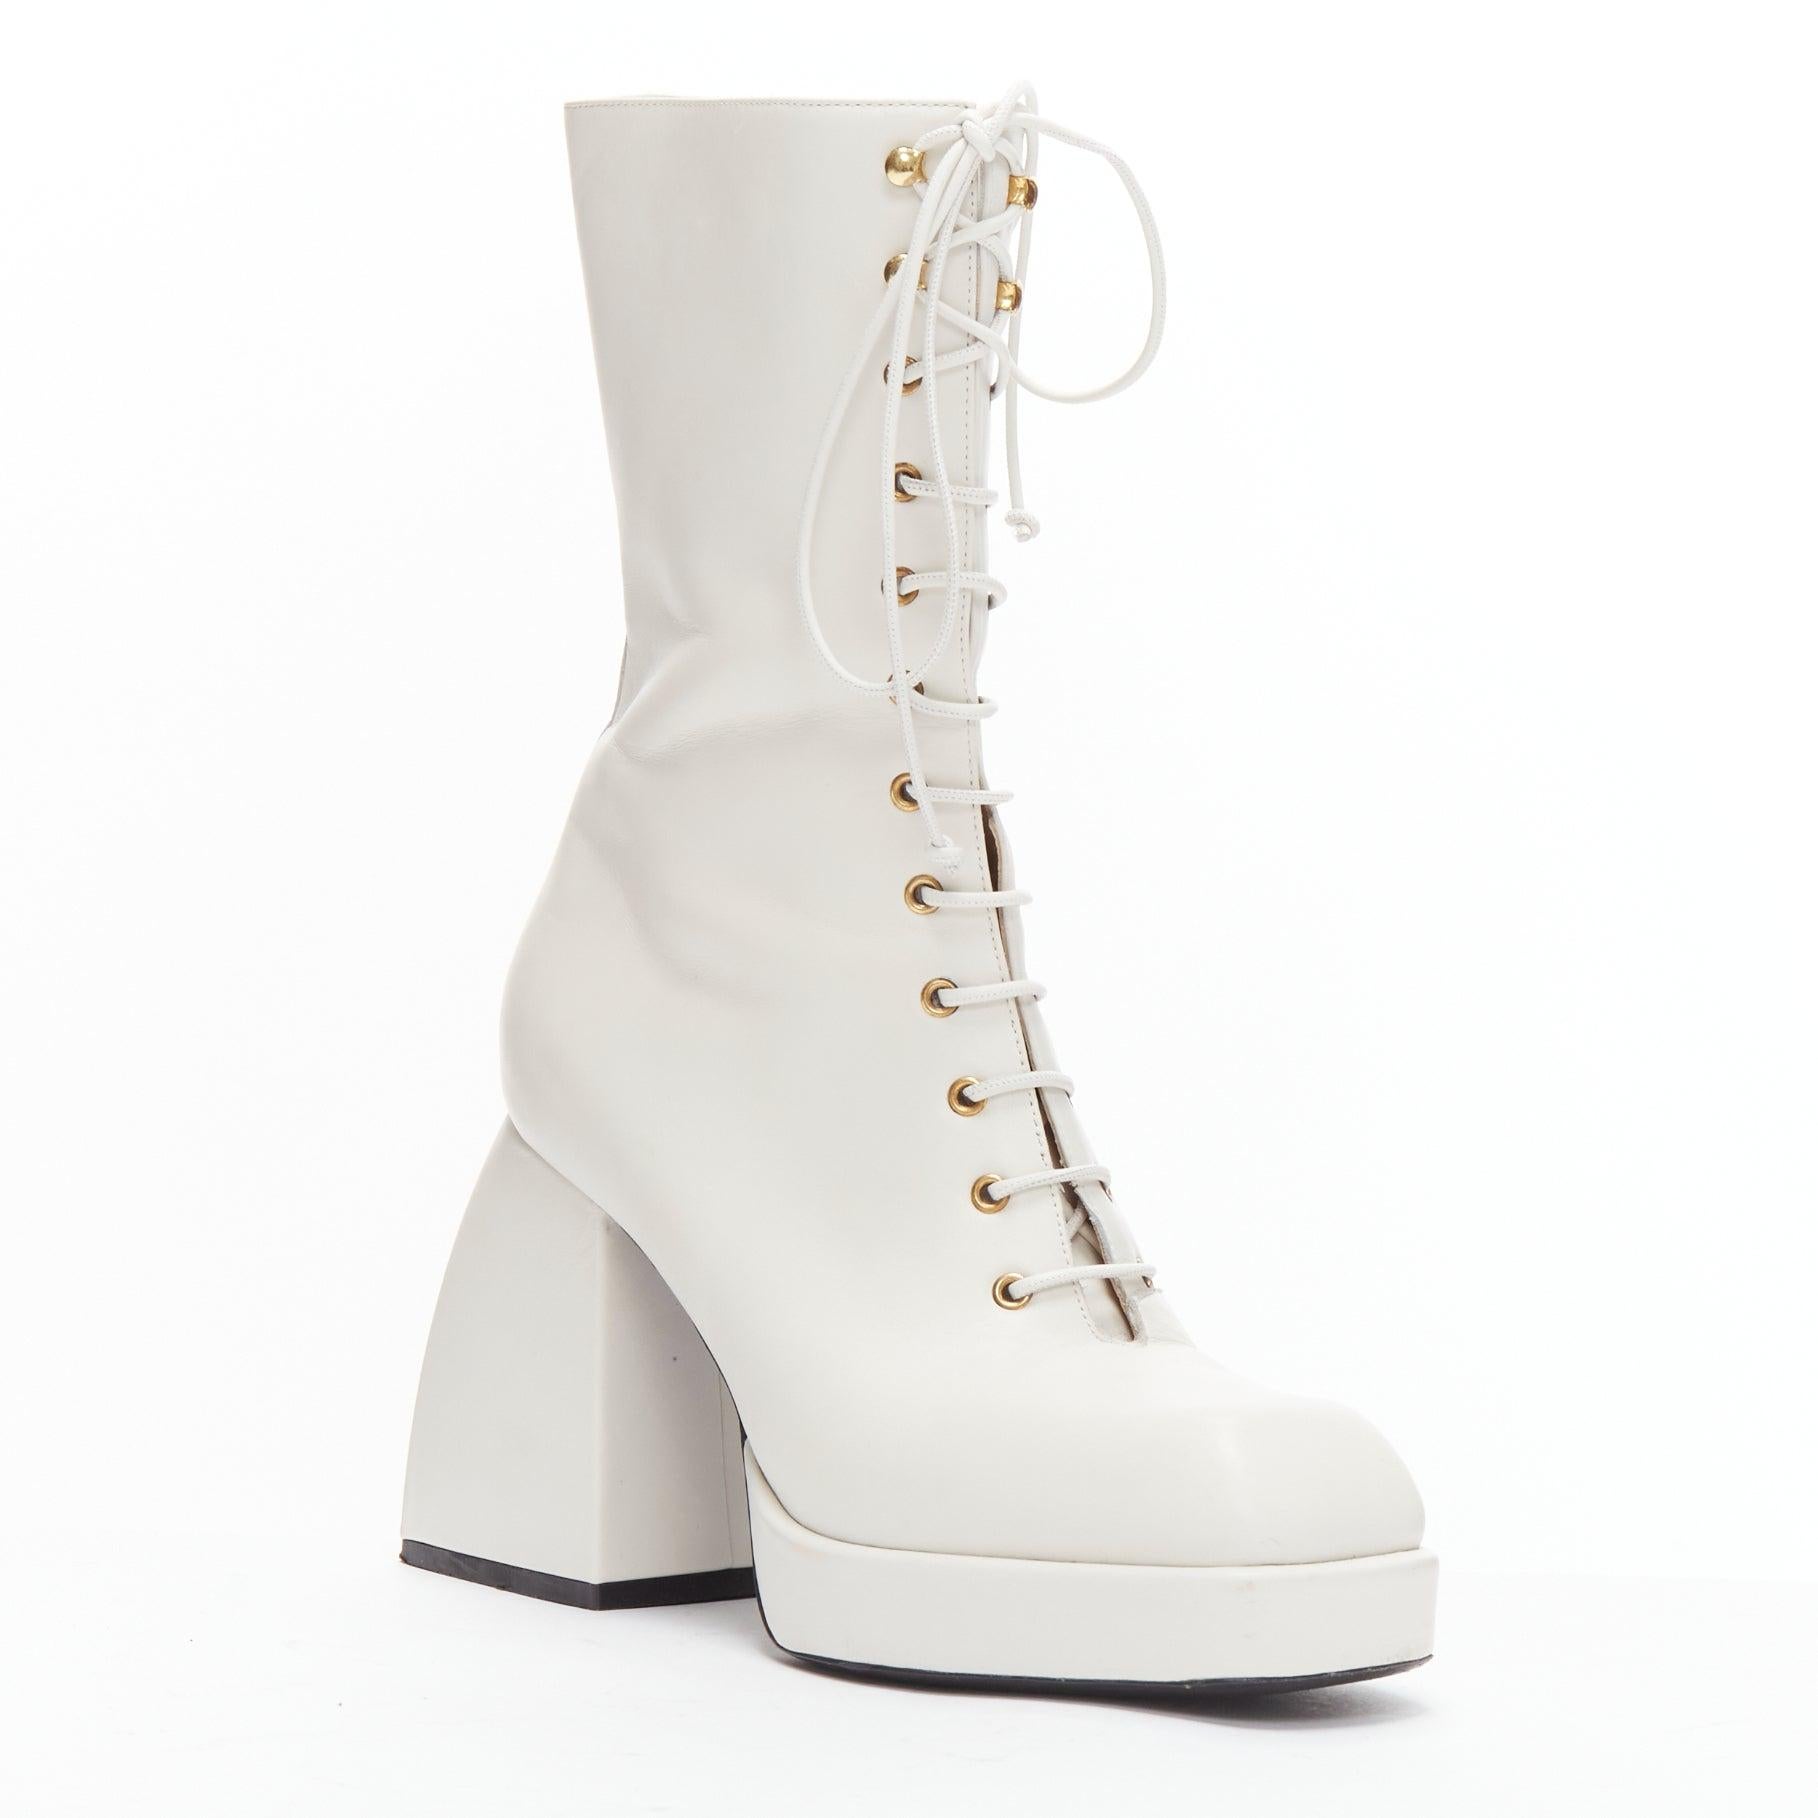 NODALETO Bulla Candy white leather chunky heels lace up boots EU38
Reference: BSHW/A00178
Brand: Nodaleto
Model: Bulla Candy
Material: Leather
Color: White
Pattern: Solid
Closure: Lace Up
Lining: Beige Leather
Extra Details: Chunky block heels.
Made